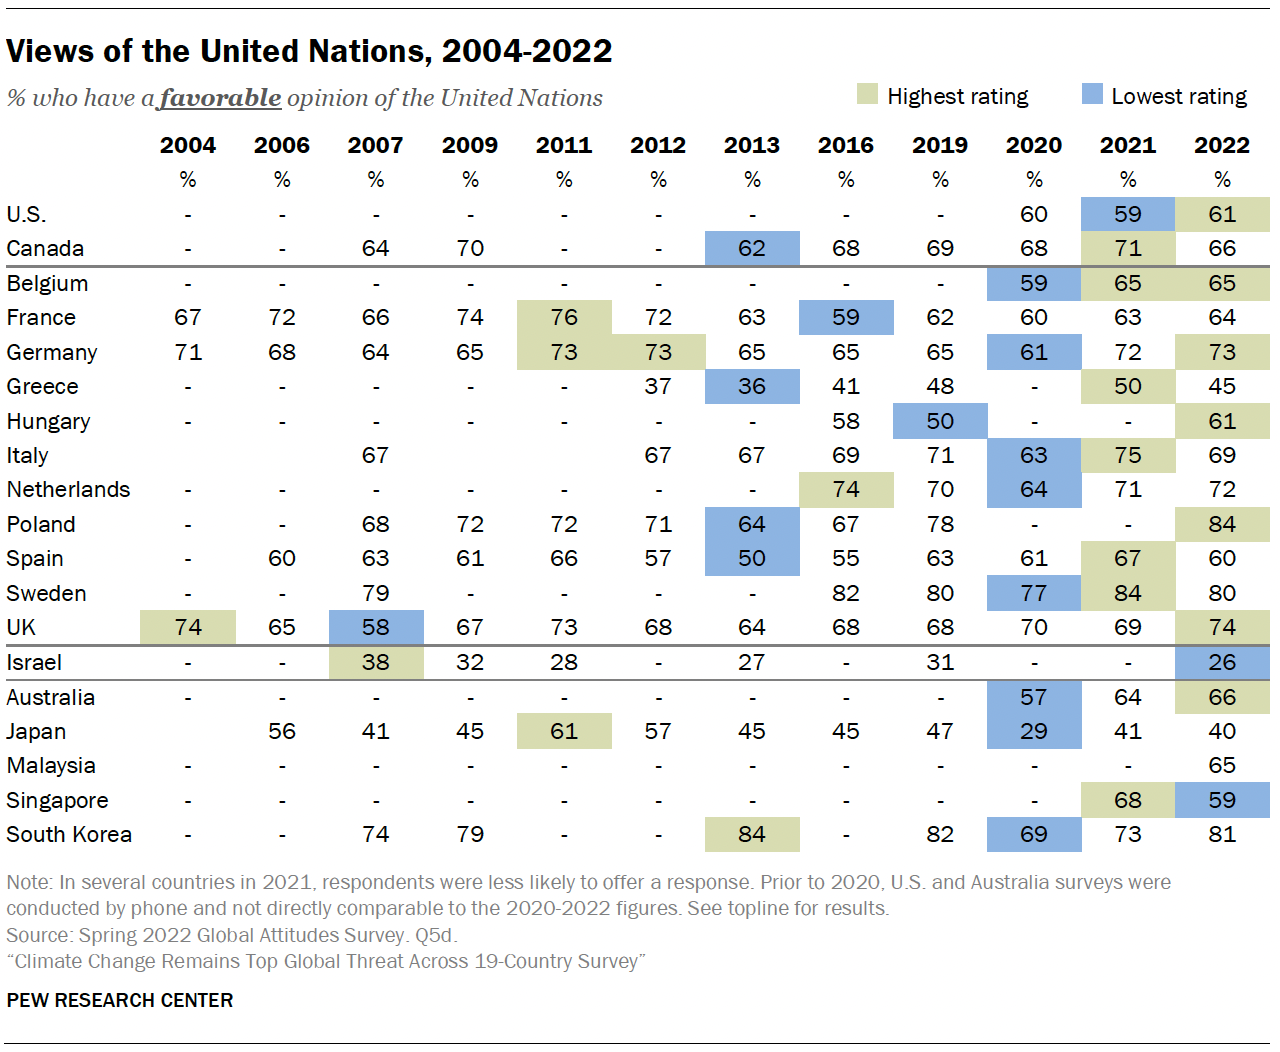 Views of the United Nations, 2004-2022